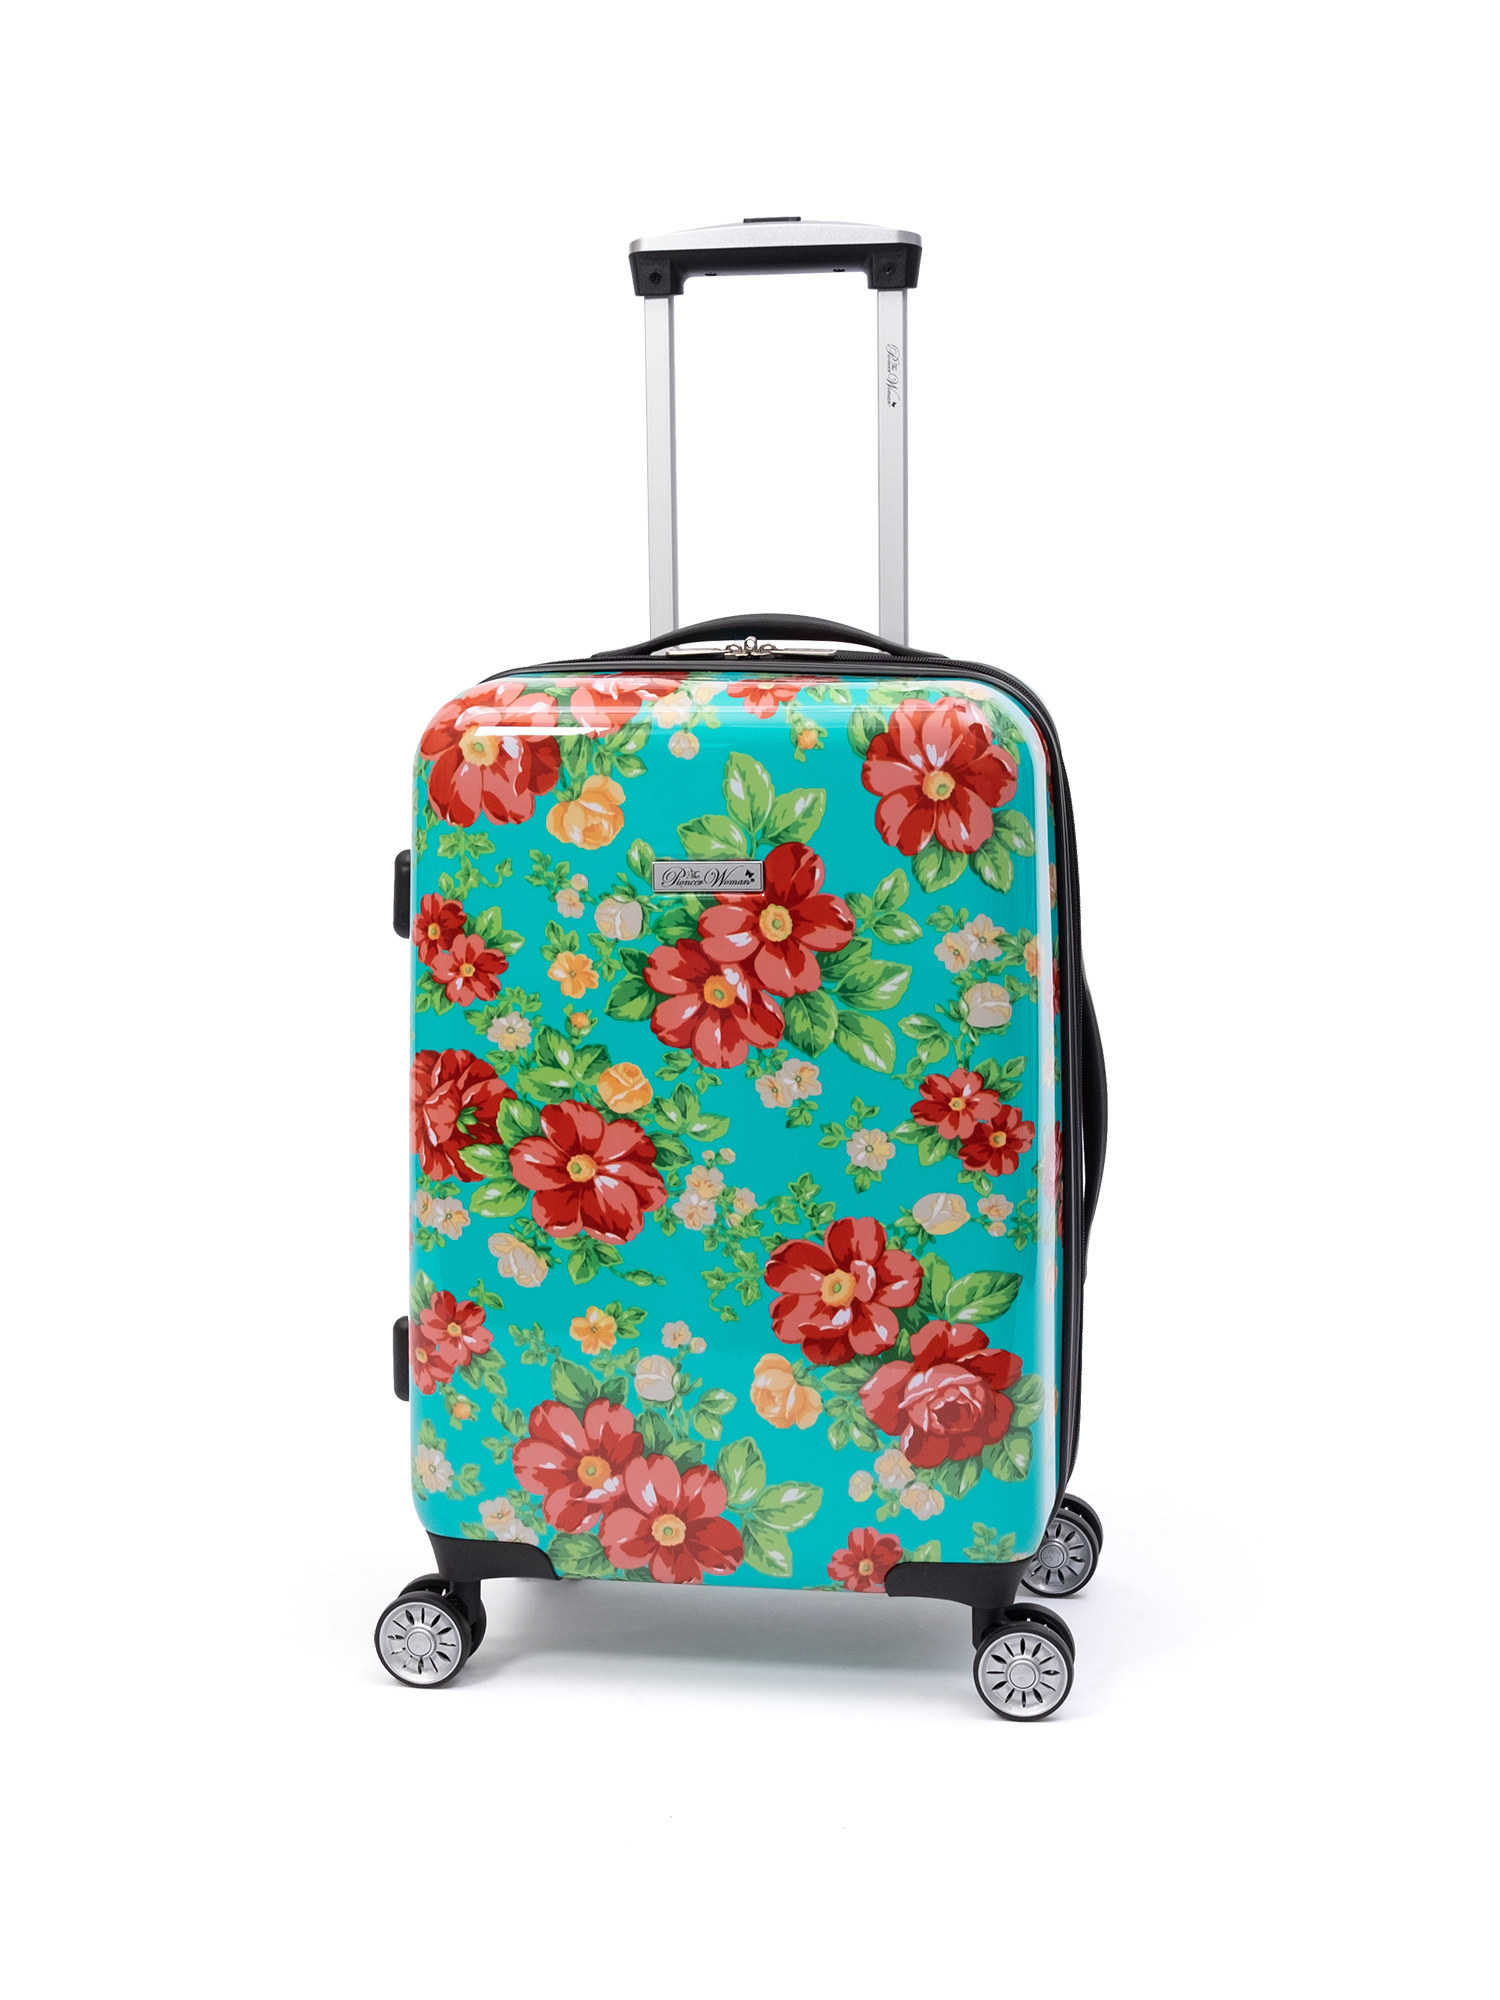 An image of a floral carry-on suitcase with four double wheels, soft touch carry handles, adjustable tie straps, and more